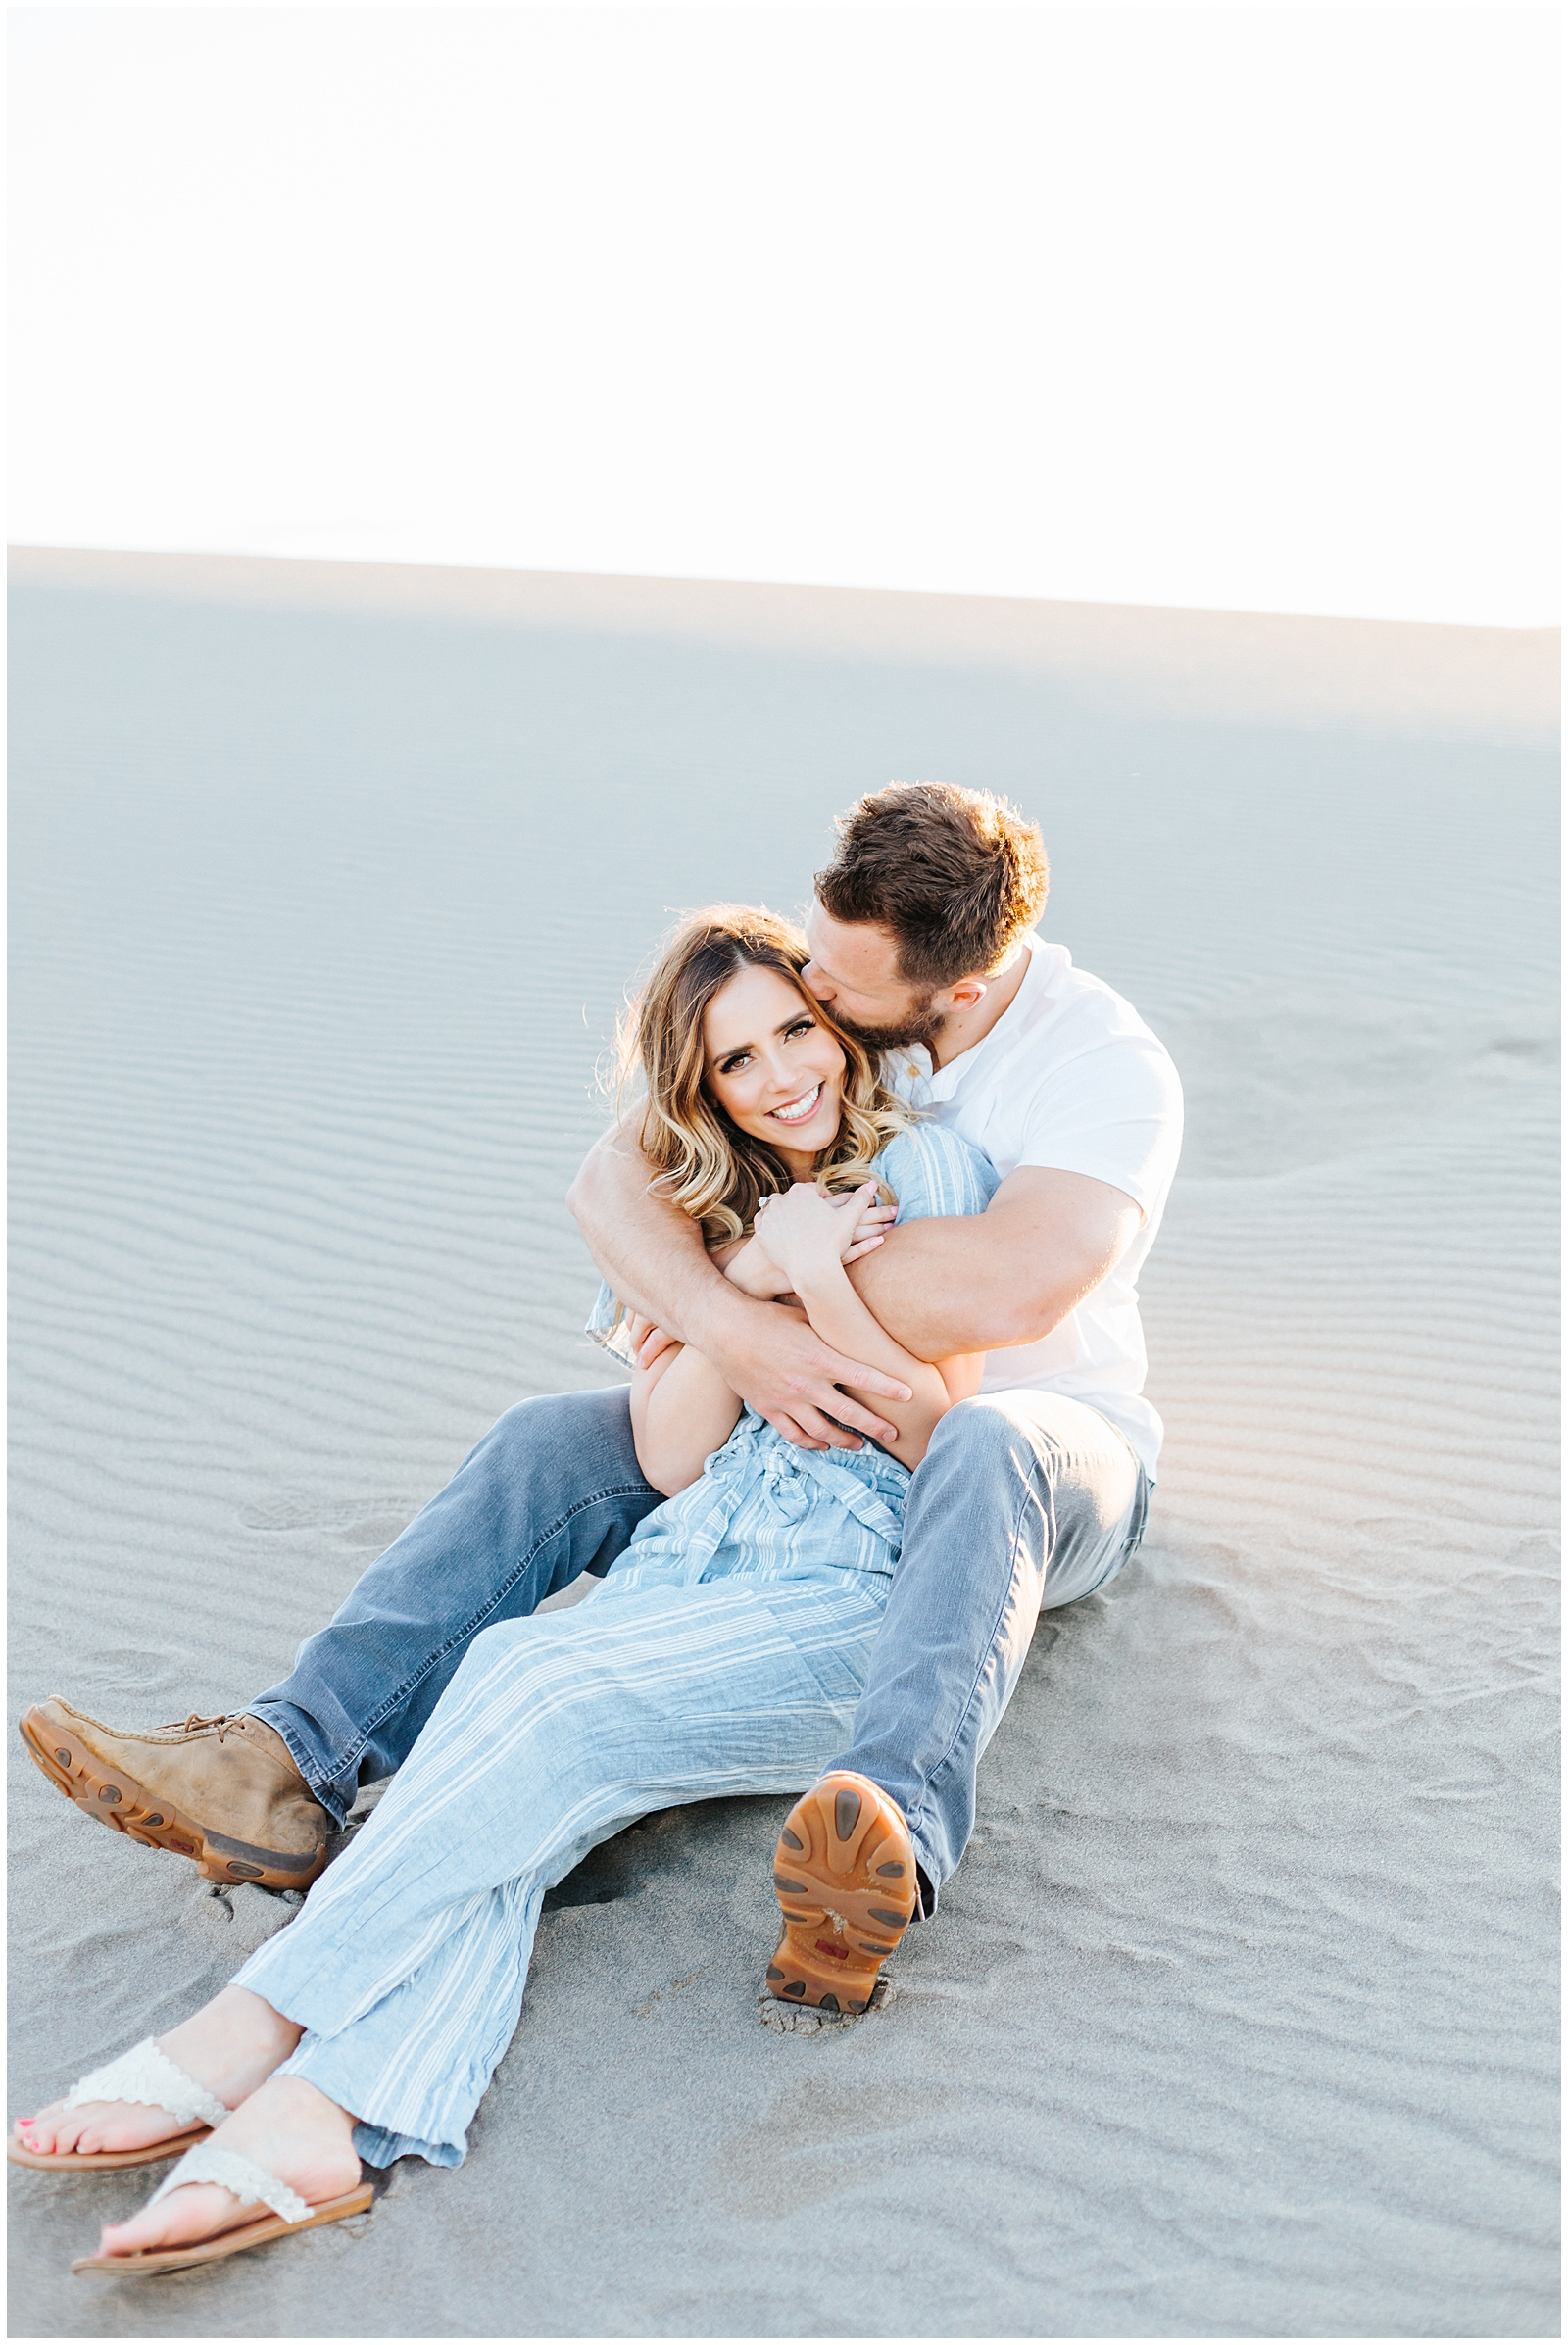 Beachy Romantic Light and Airy Sand Dunes Engagement Session in Blue Linen and White